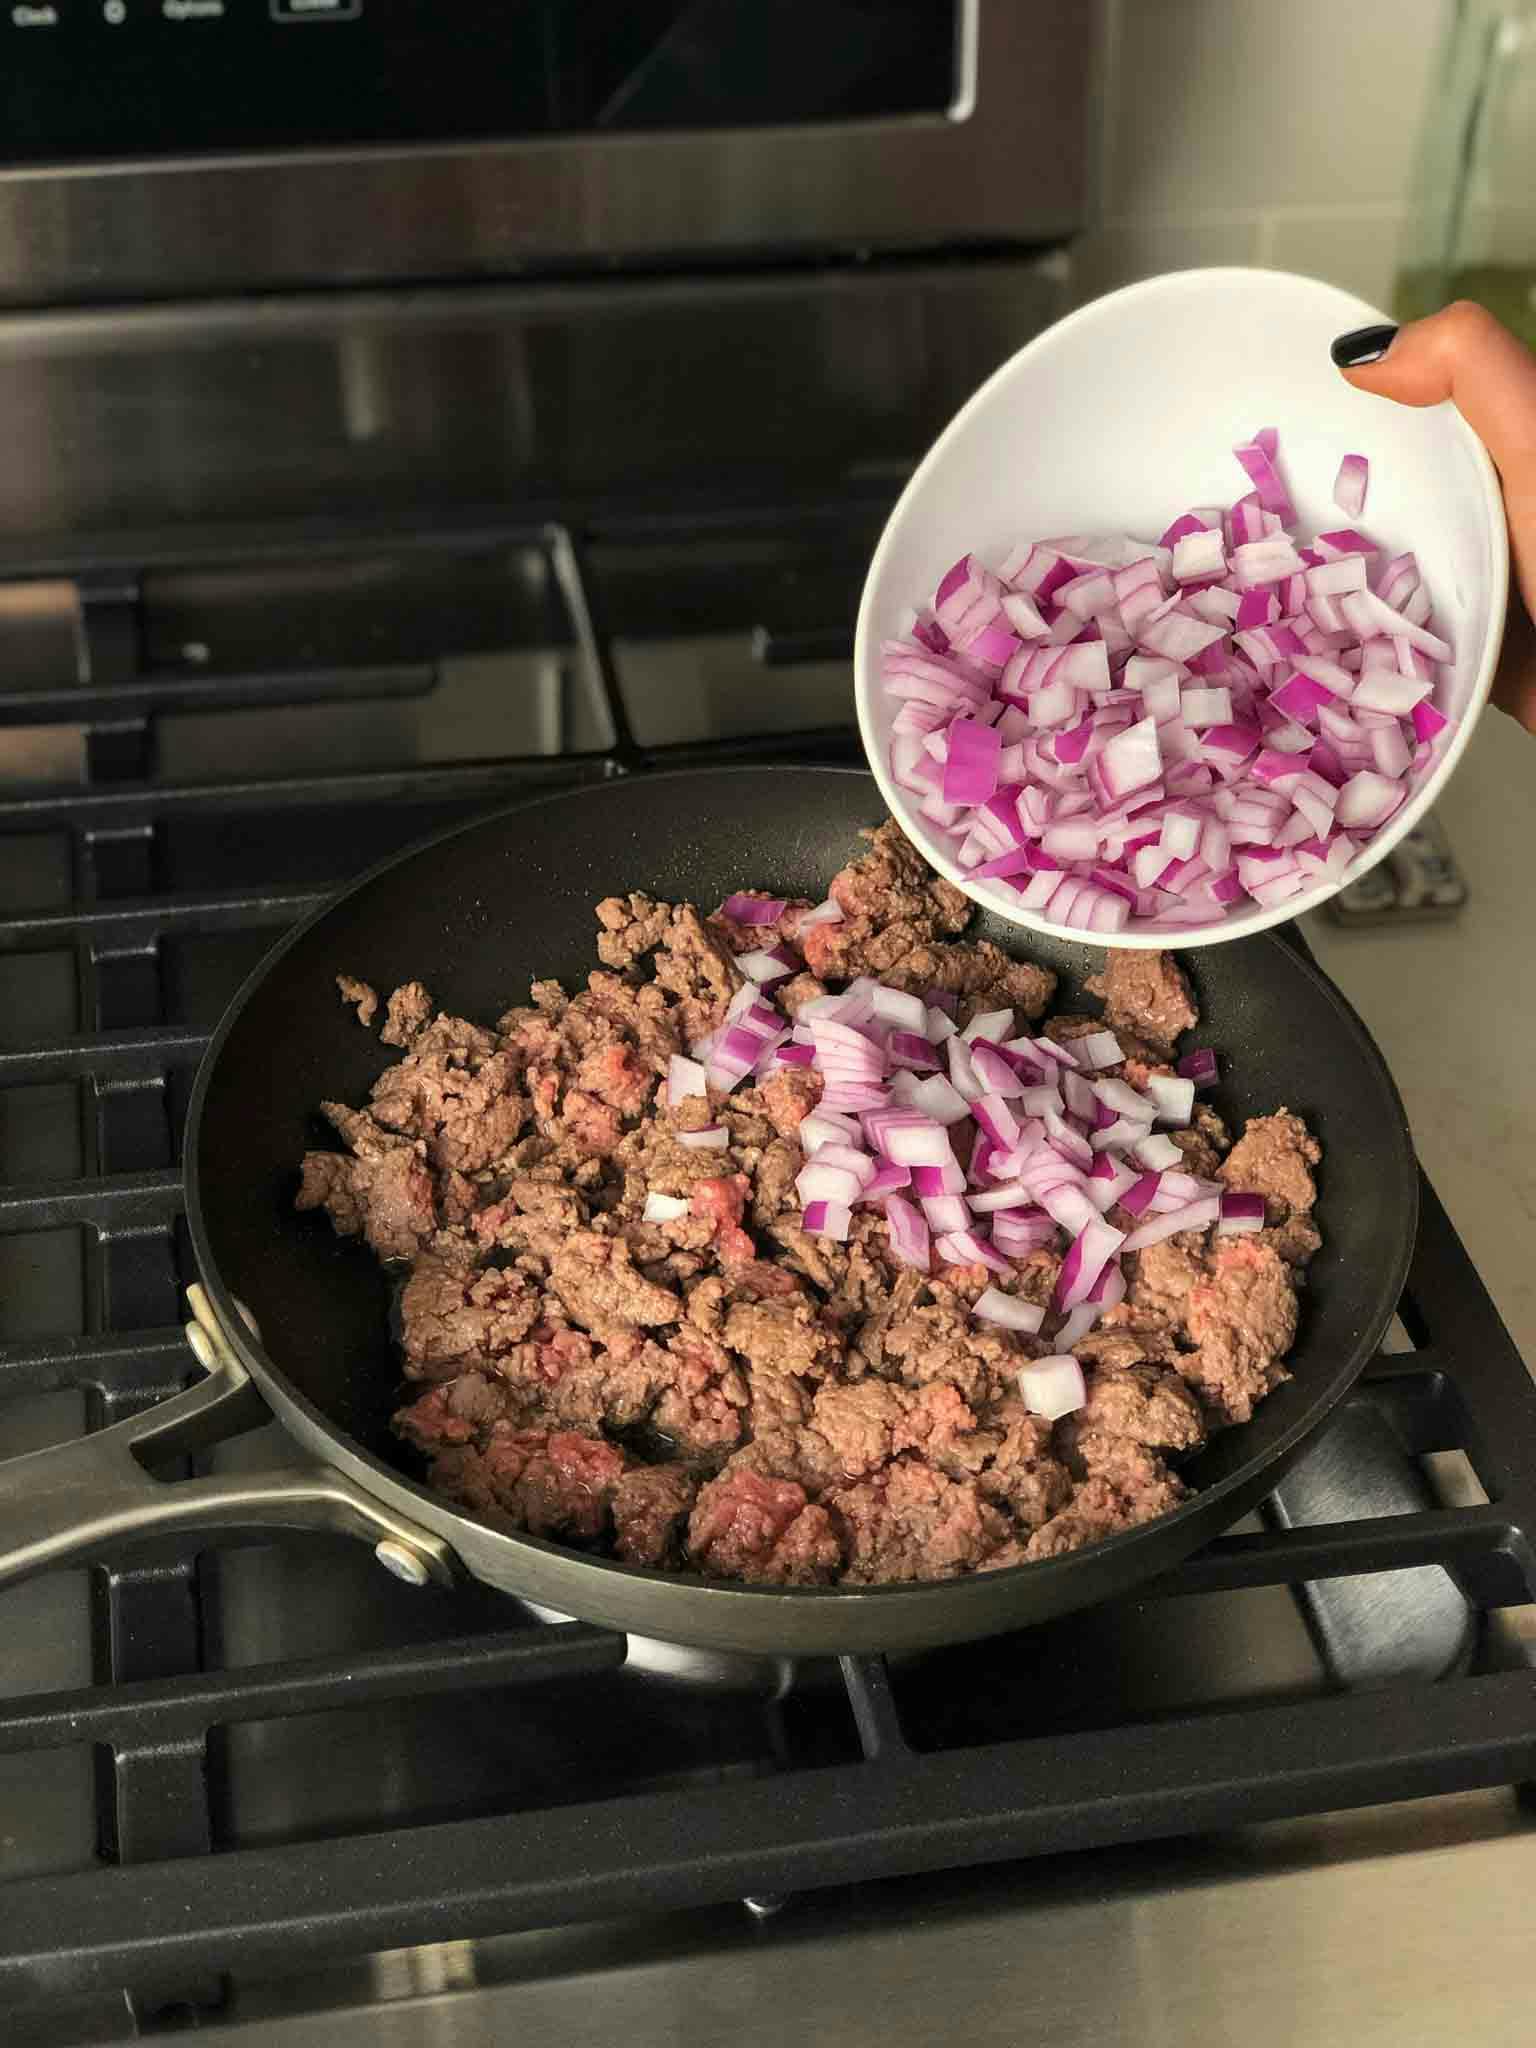 Ground beef cooking in skillet with onions being added.